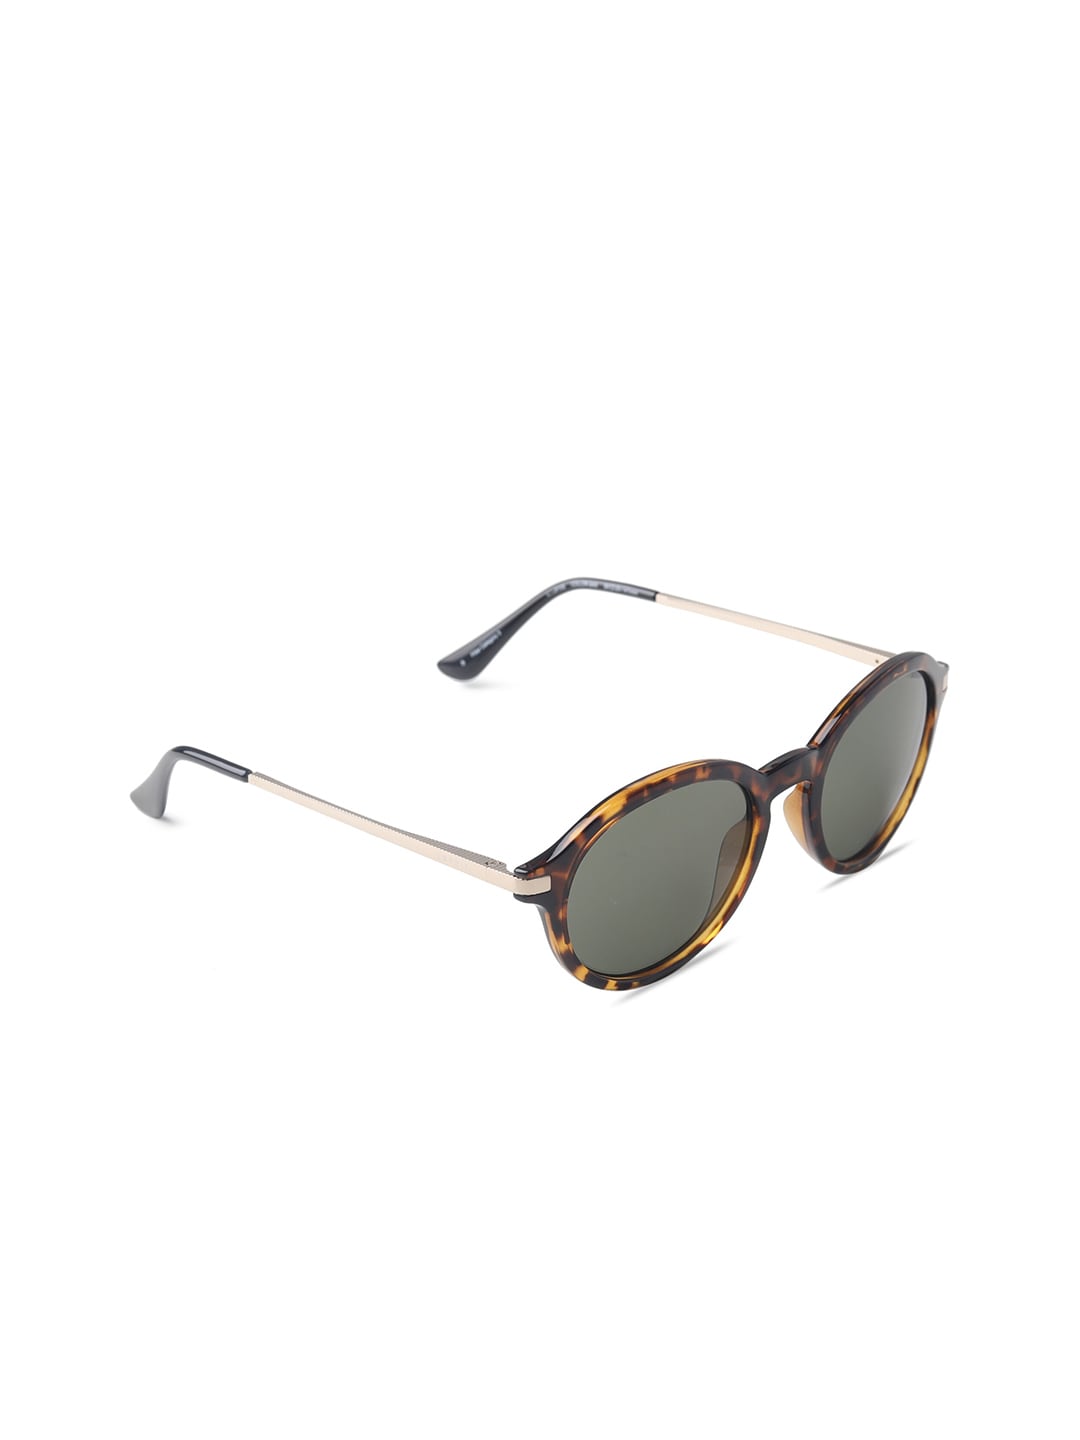 ESPRIT Women Grey Lens & Brown Round Sunglasses with UV Protected Lens Price in India